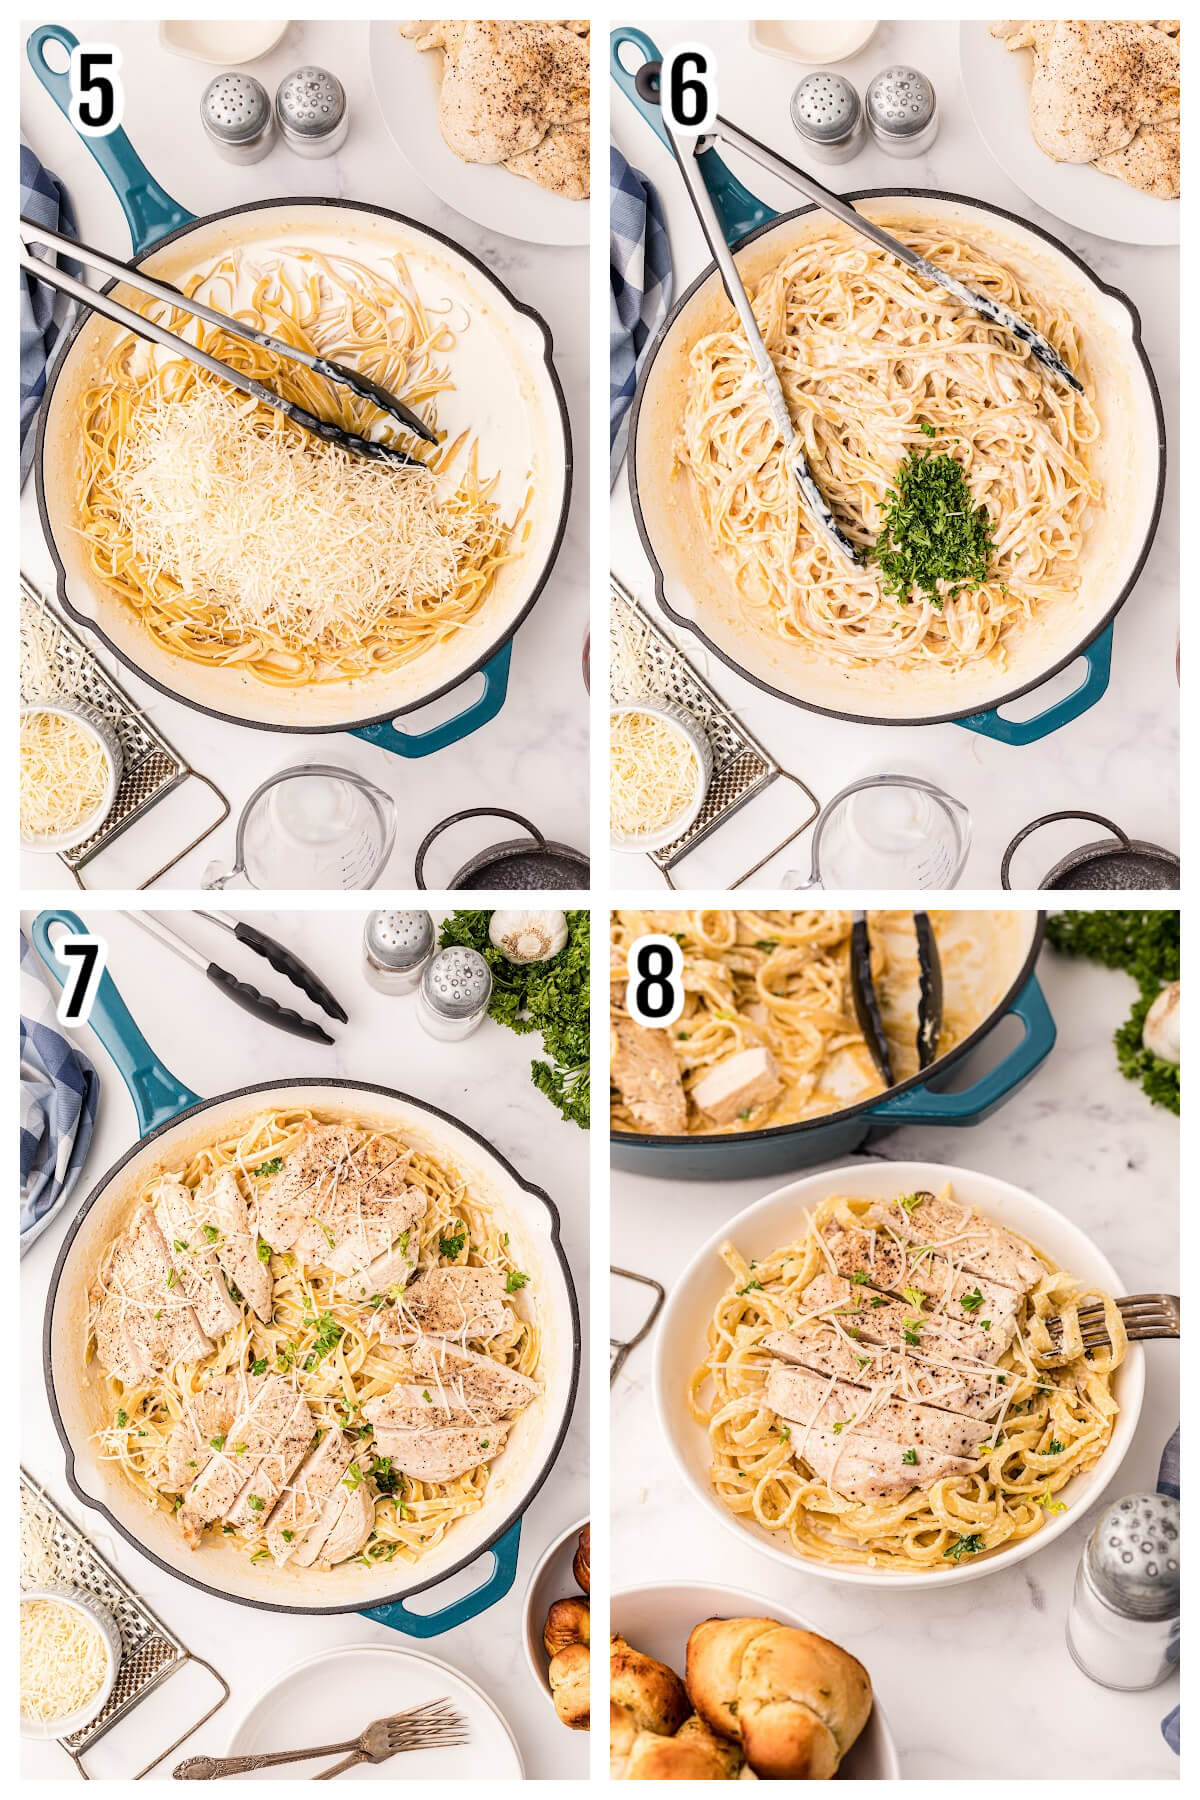 The second set of instructions fro making the American-Italian pasta dish with chicken. 